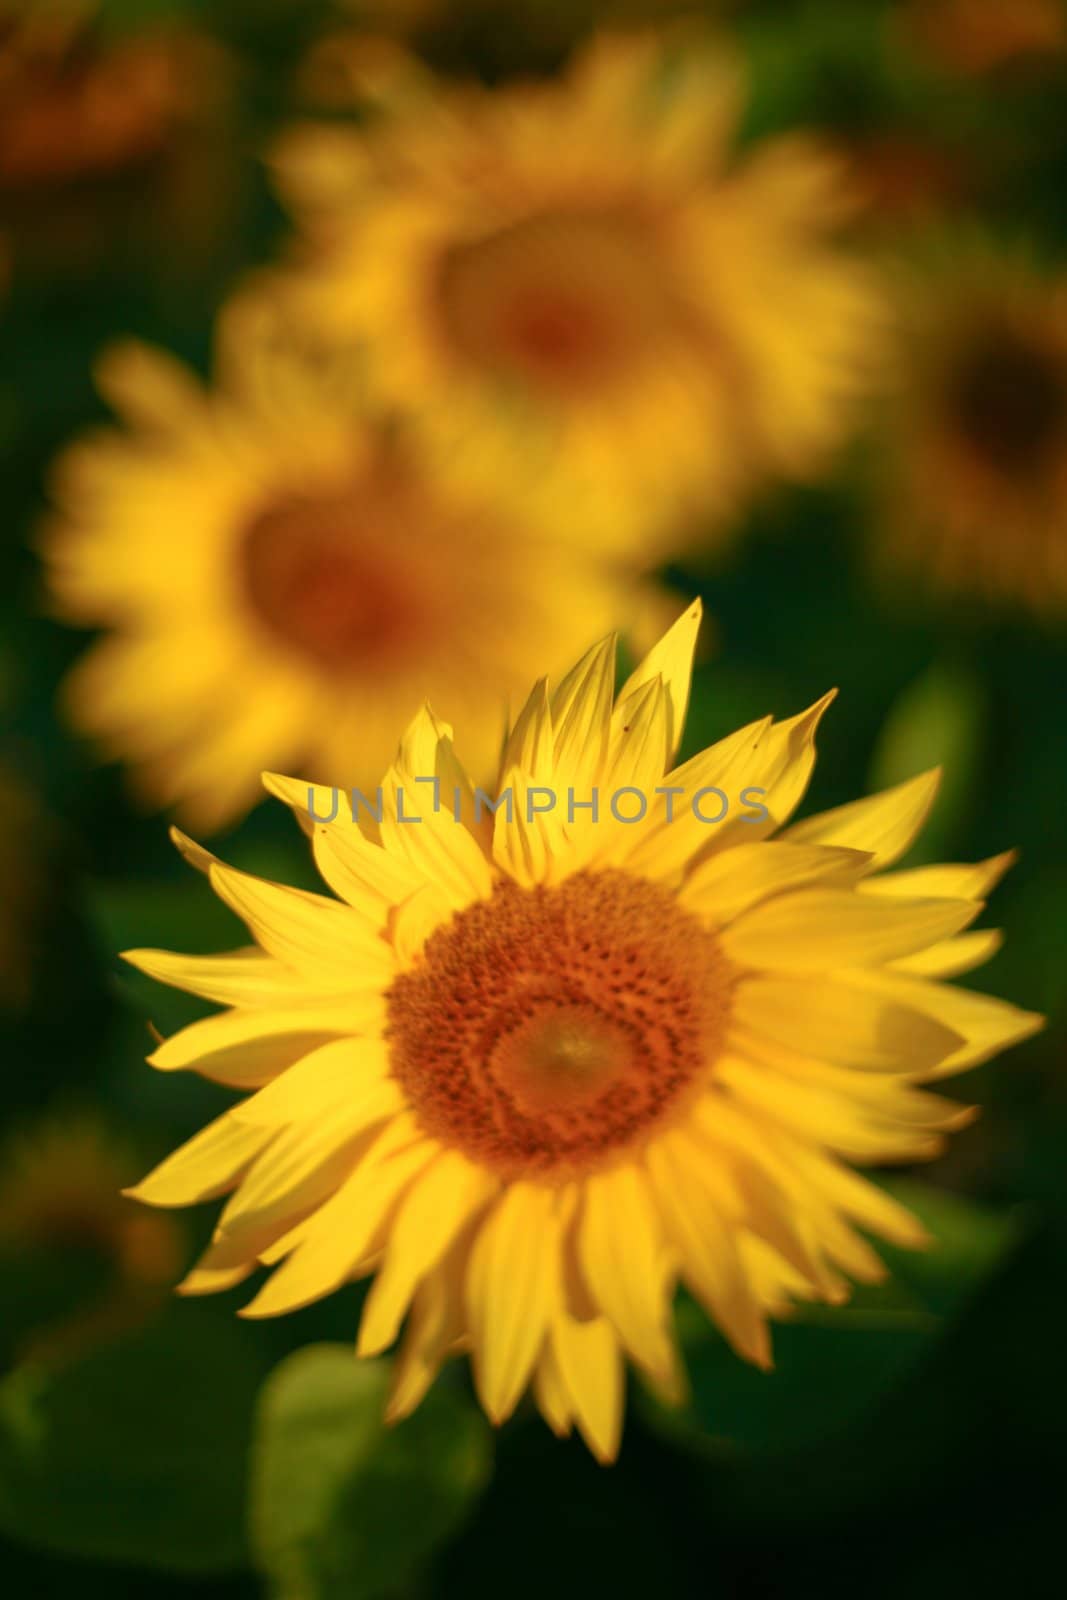 Background from a field of bright yellow sunflowers